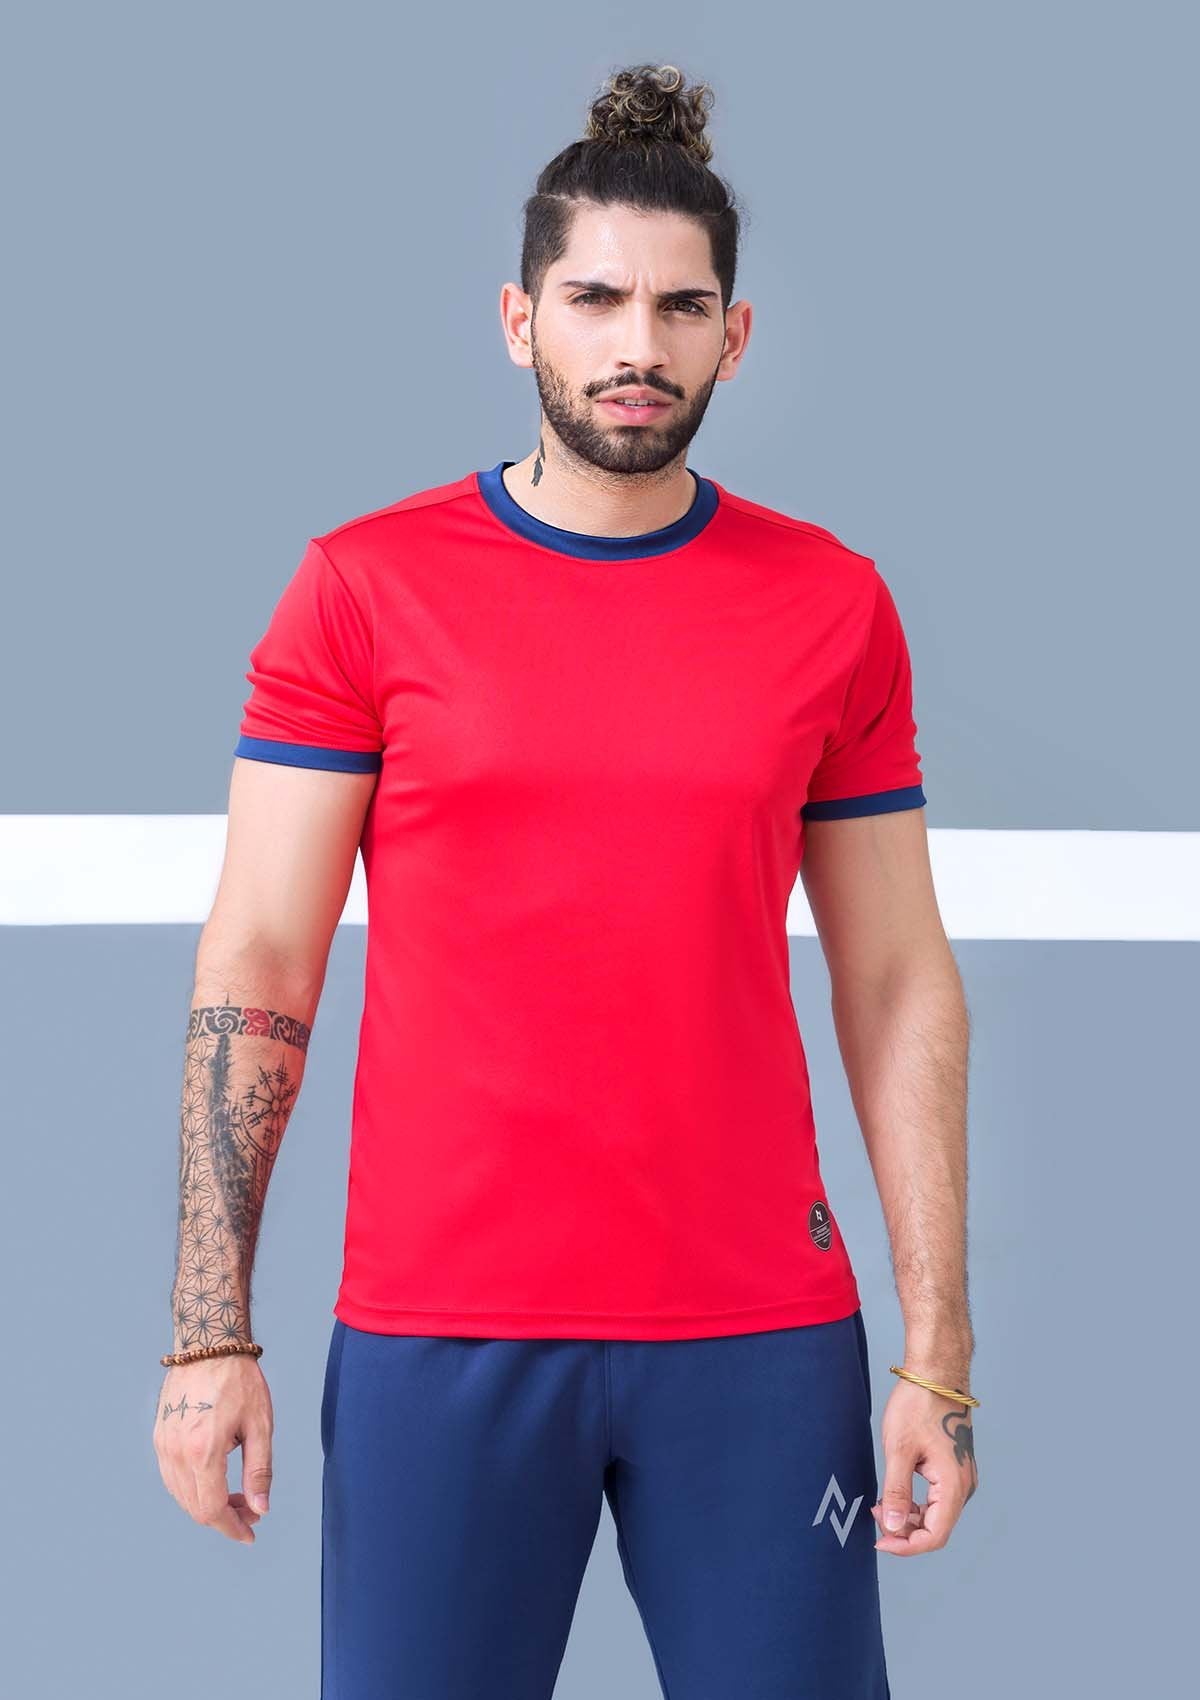 CREW NECK TRAINING TOP -NEON RED - Nomad Apparel